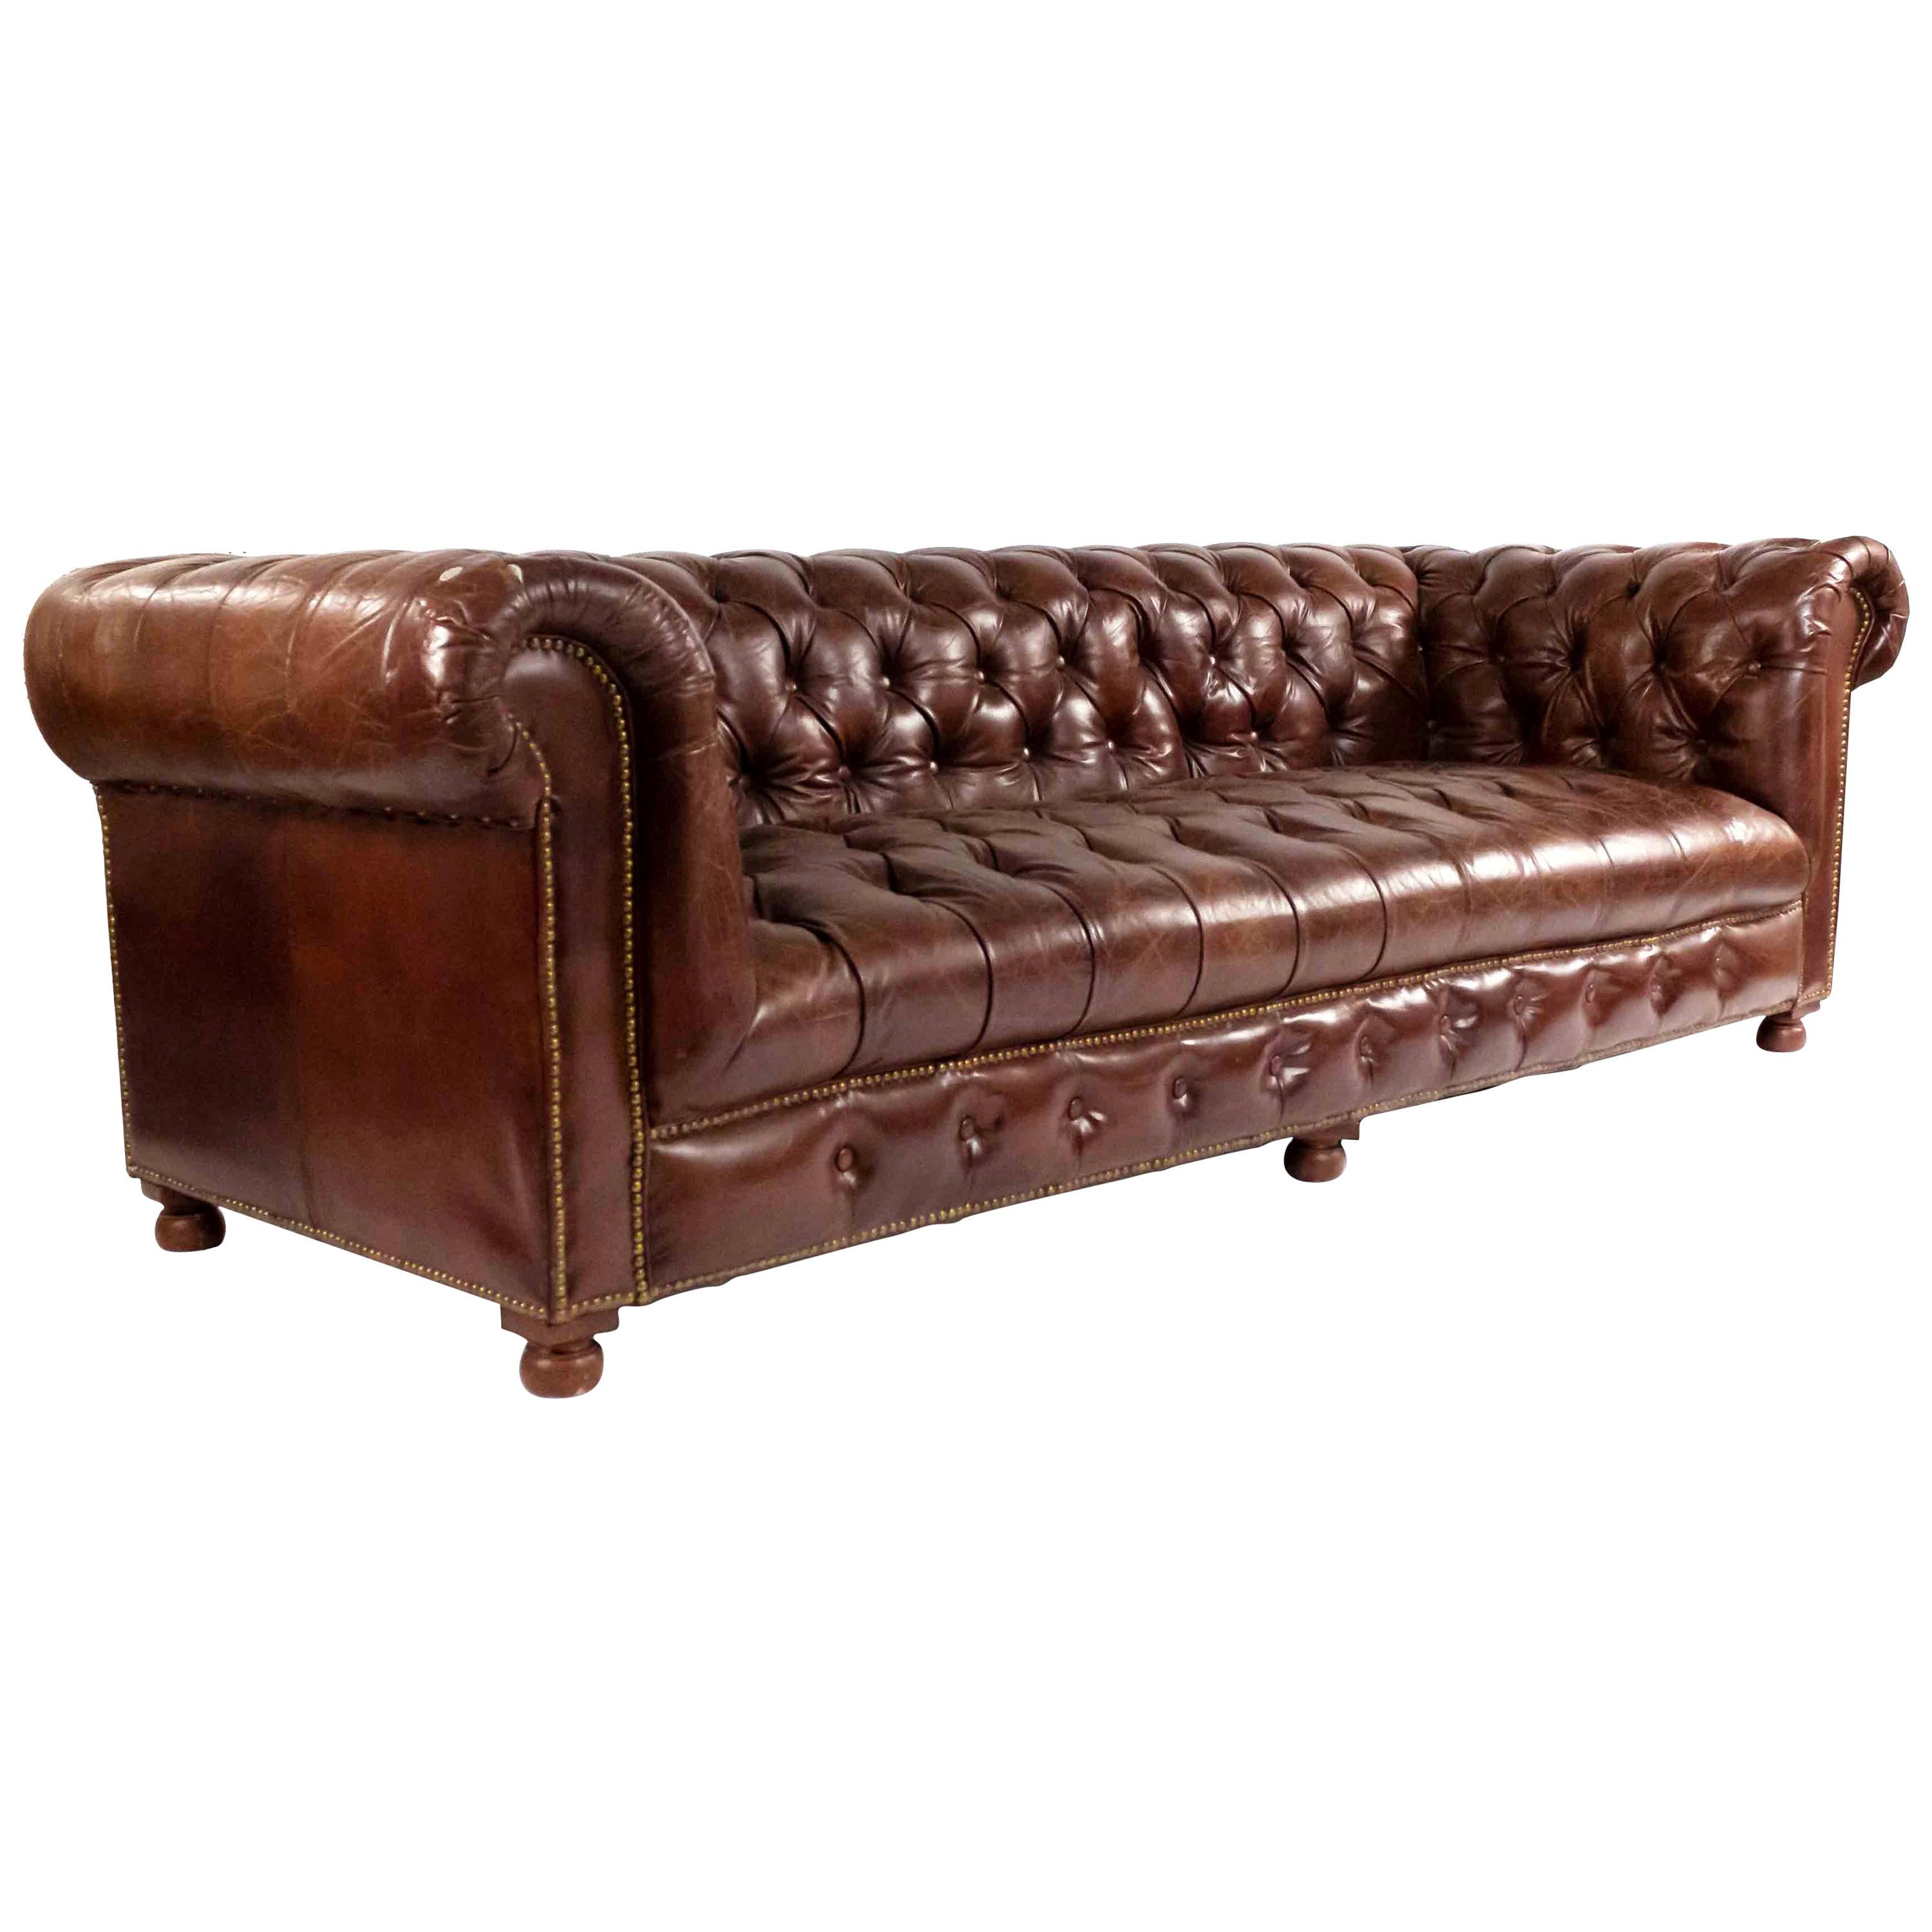 Chocolate Brown Leather Chesterfield Sofa